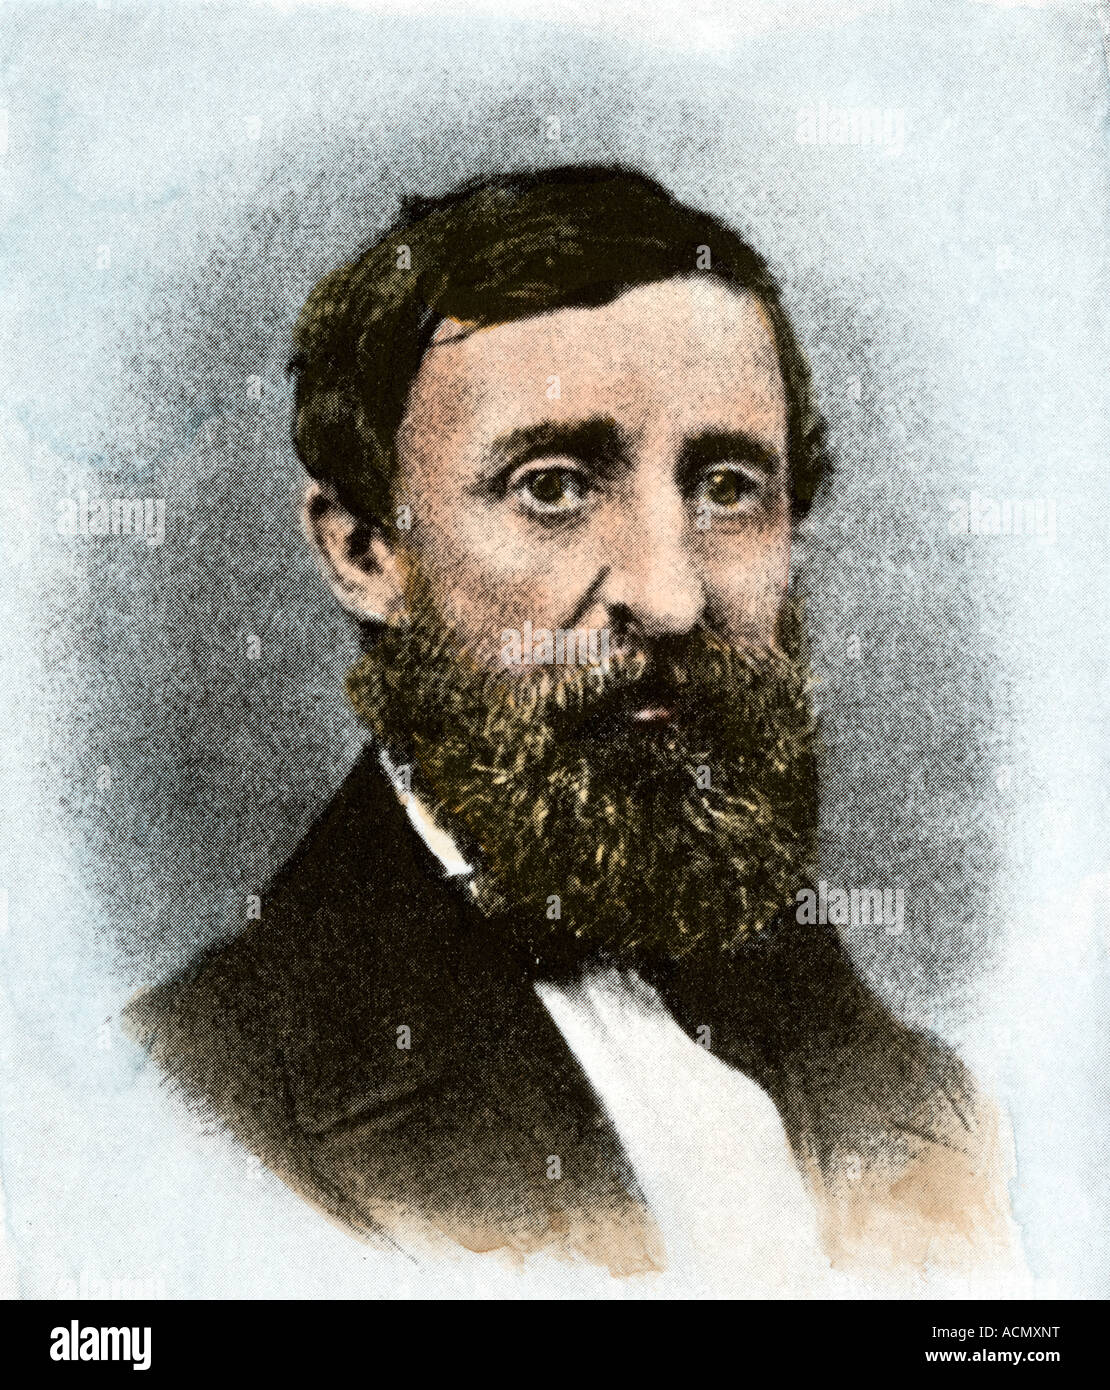 Henry David Thoreau at age 43. Hand-colored halftone of a photograph Stock Photo